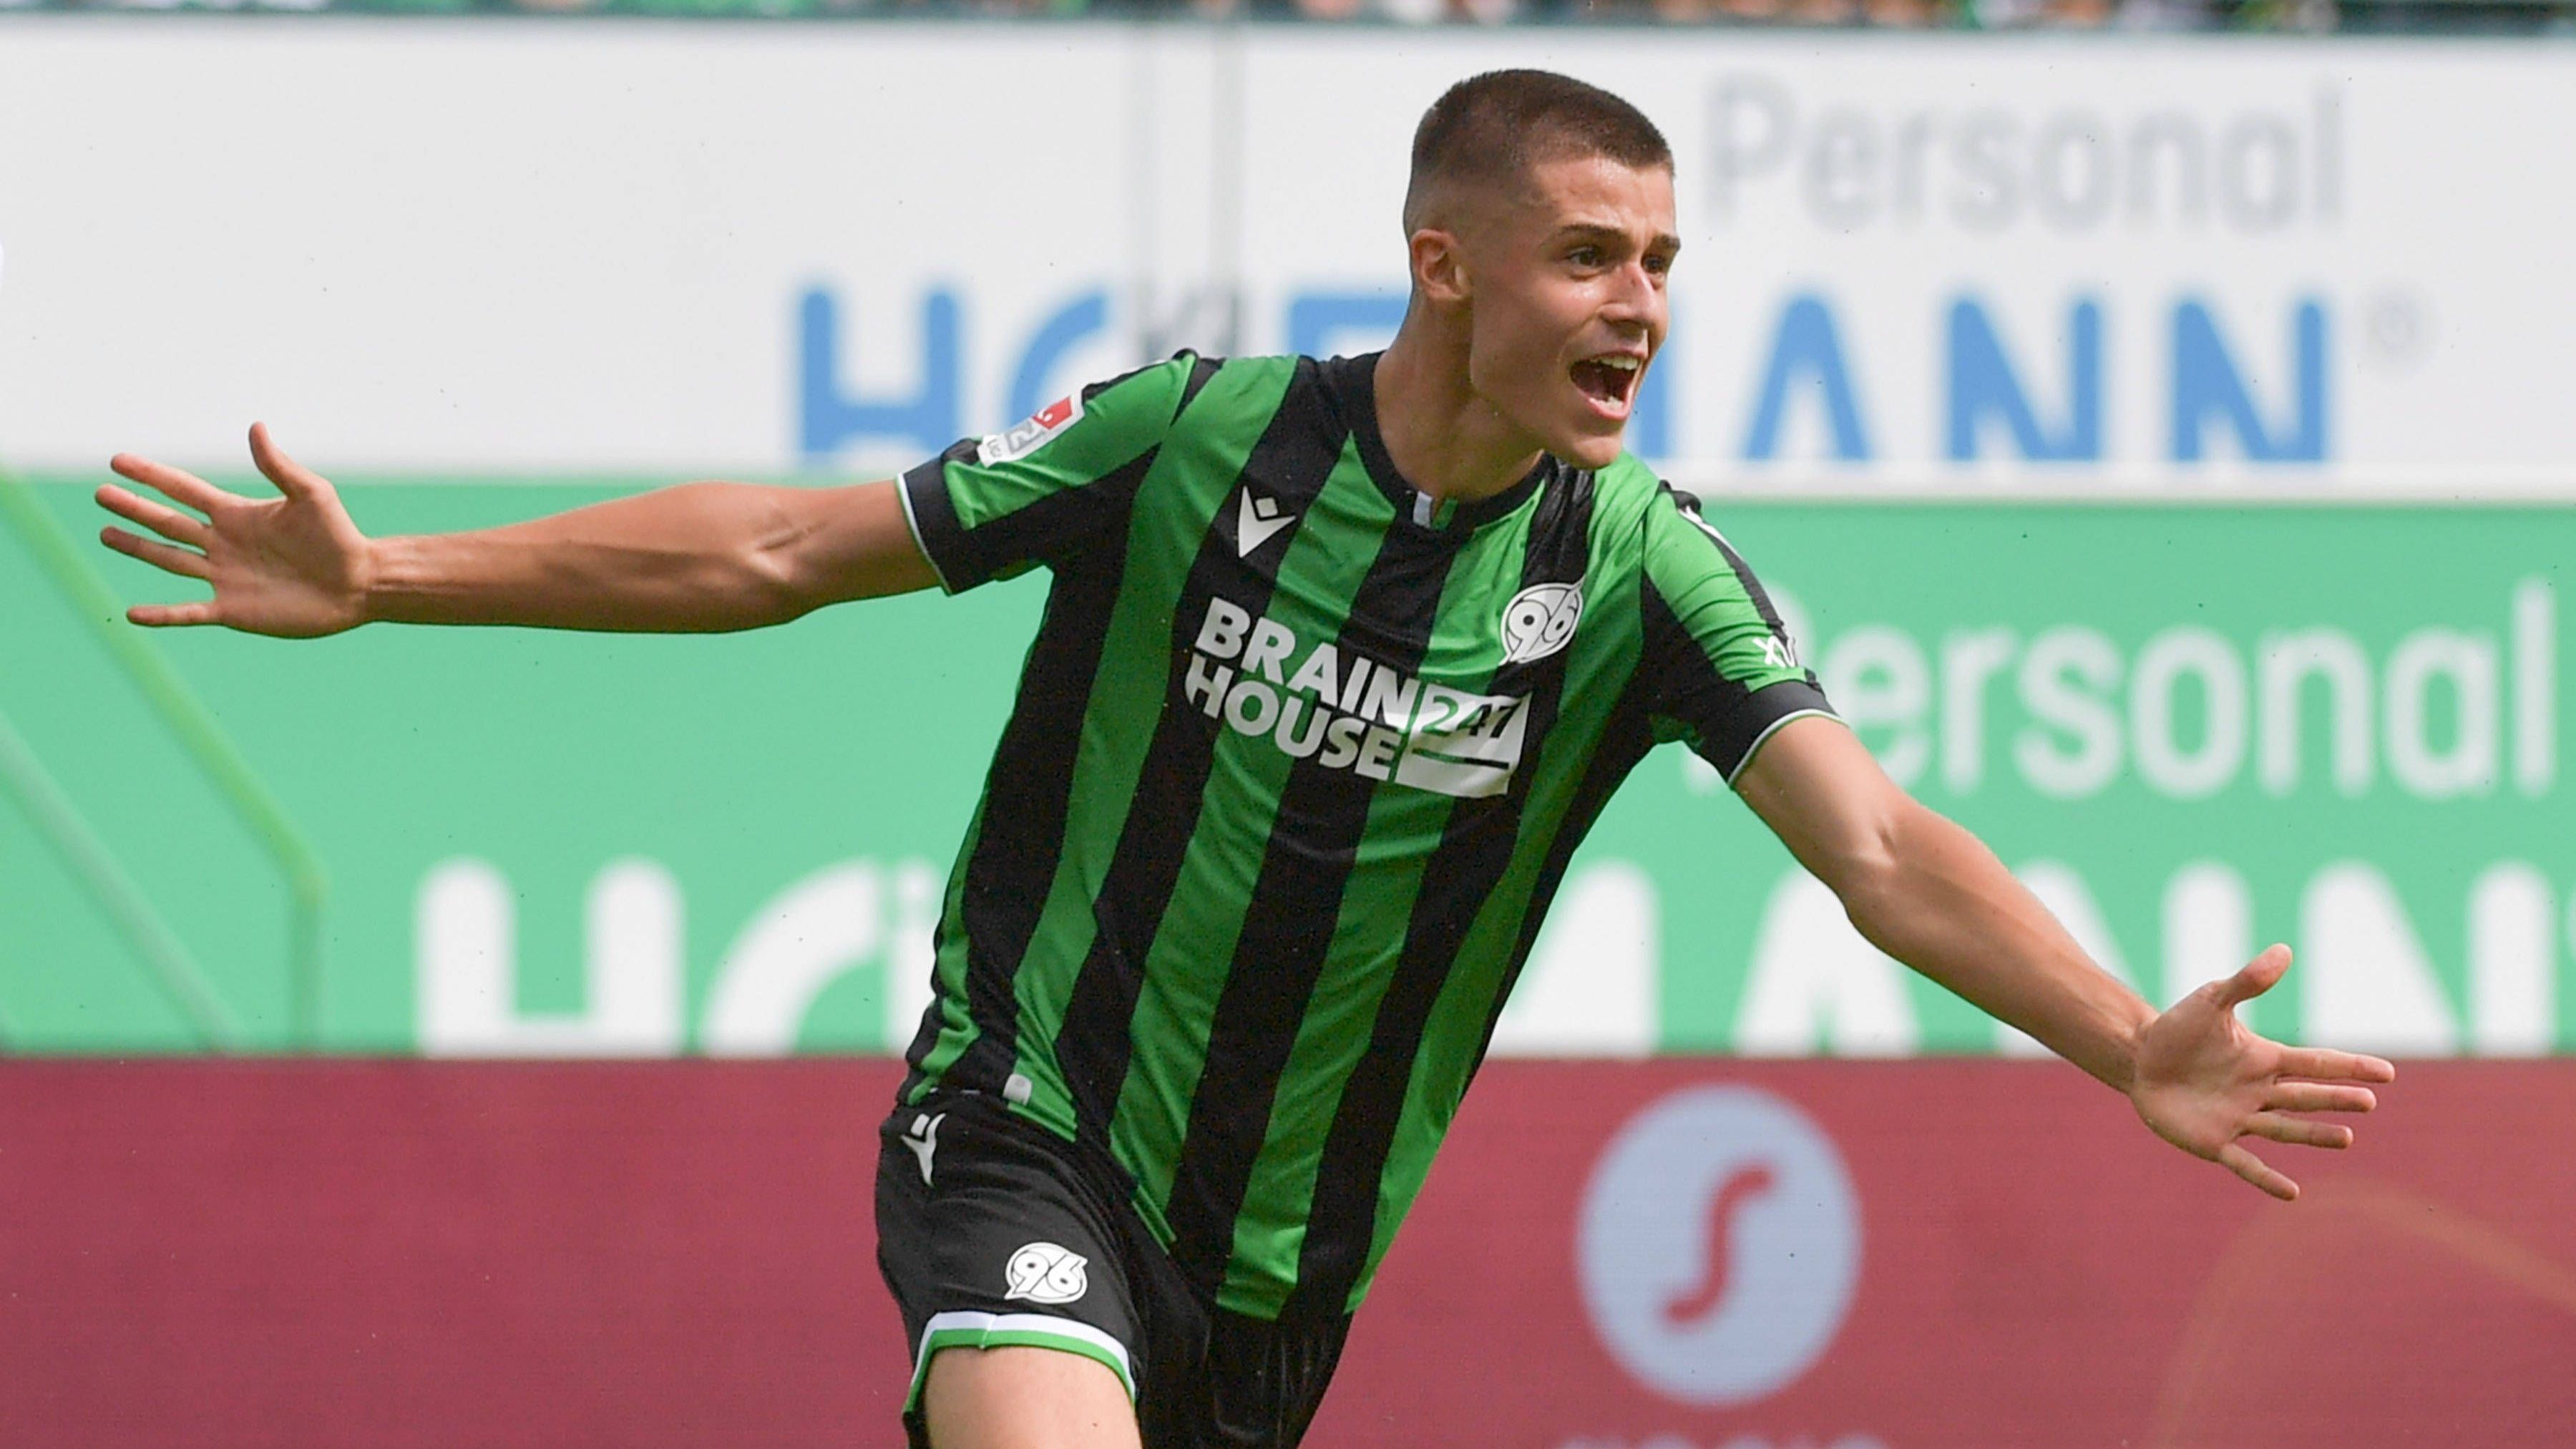 <strong>#9 Nicolo Tresoldi</strong><br>• Position: Angriff<br>• Alter: 19<br>• Verein: Hannover 96<br>• U21-Länderspiele: 0